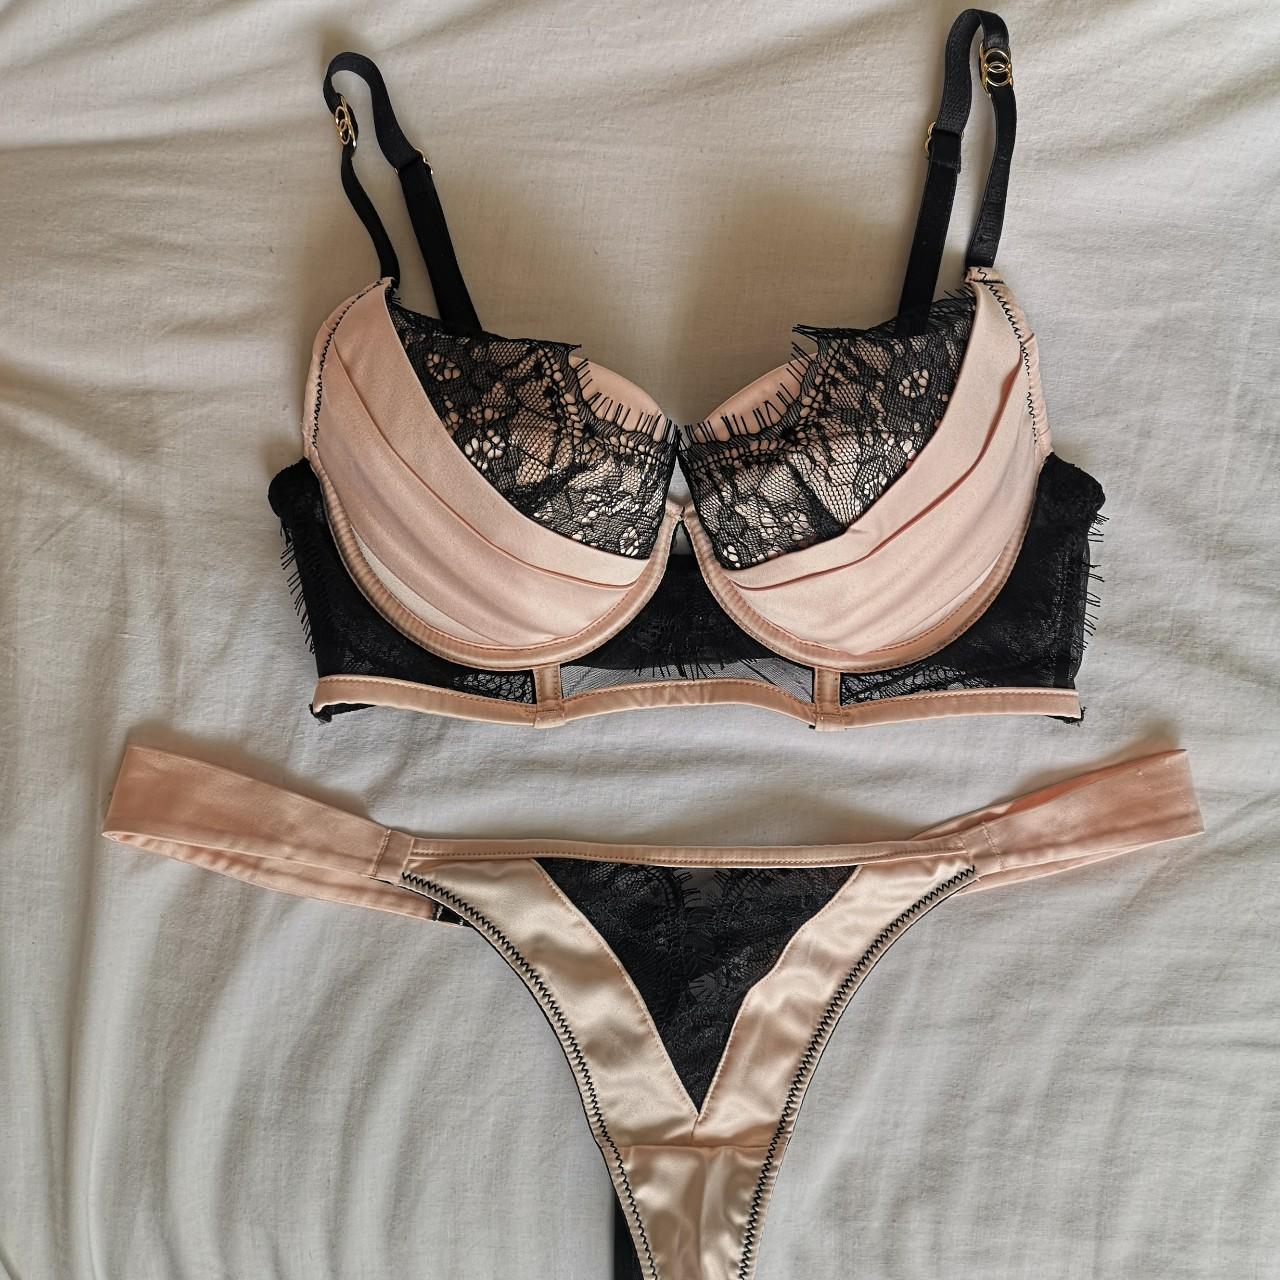 Ann summers push up bra in light pink with black - Depop